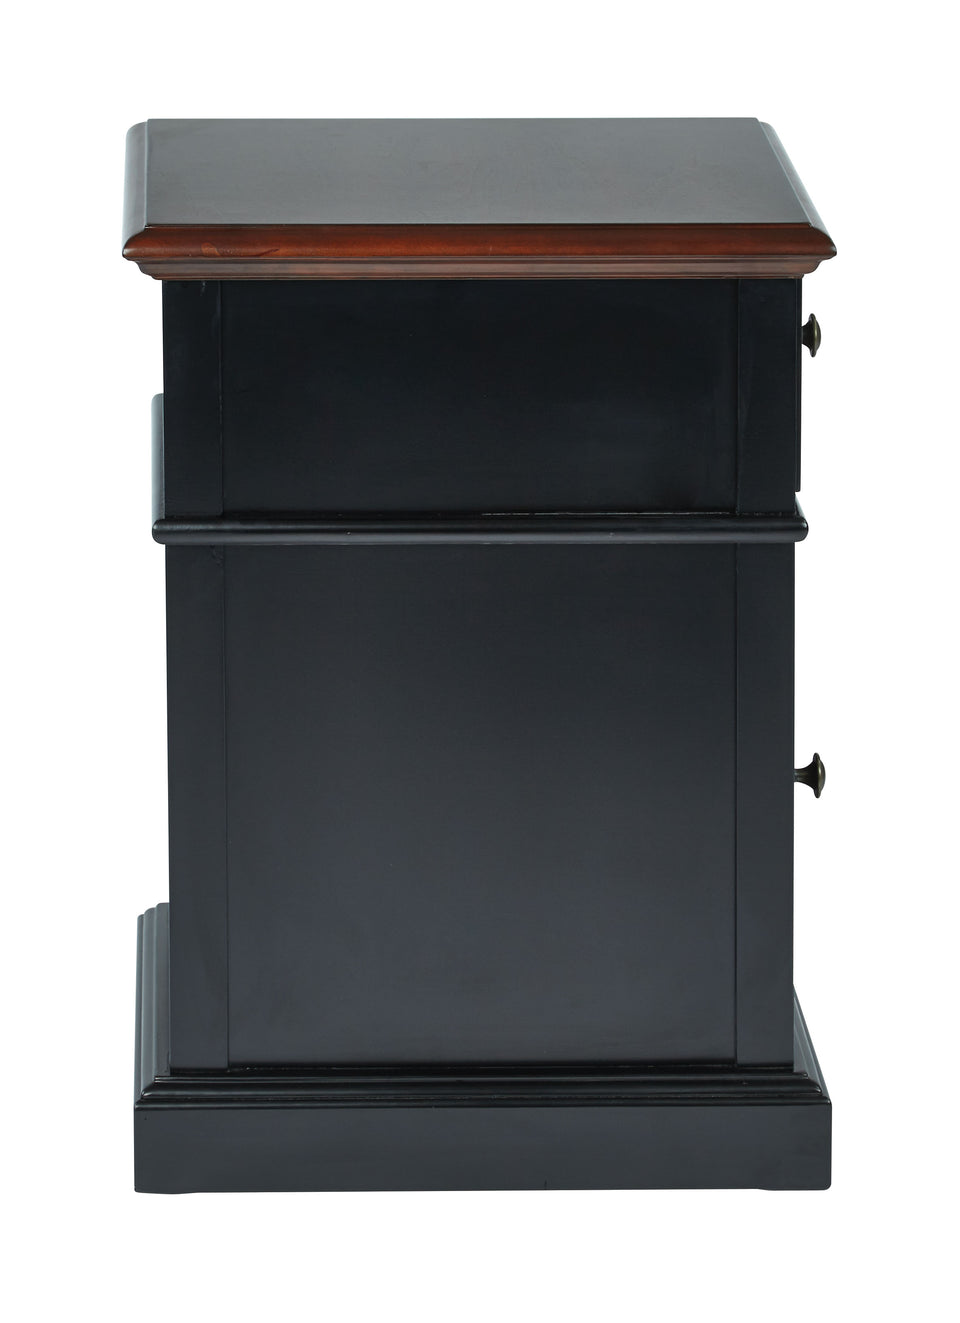 oxford two tone walnut and black side table with single drawer and door with metal knob side view